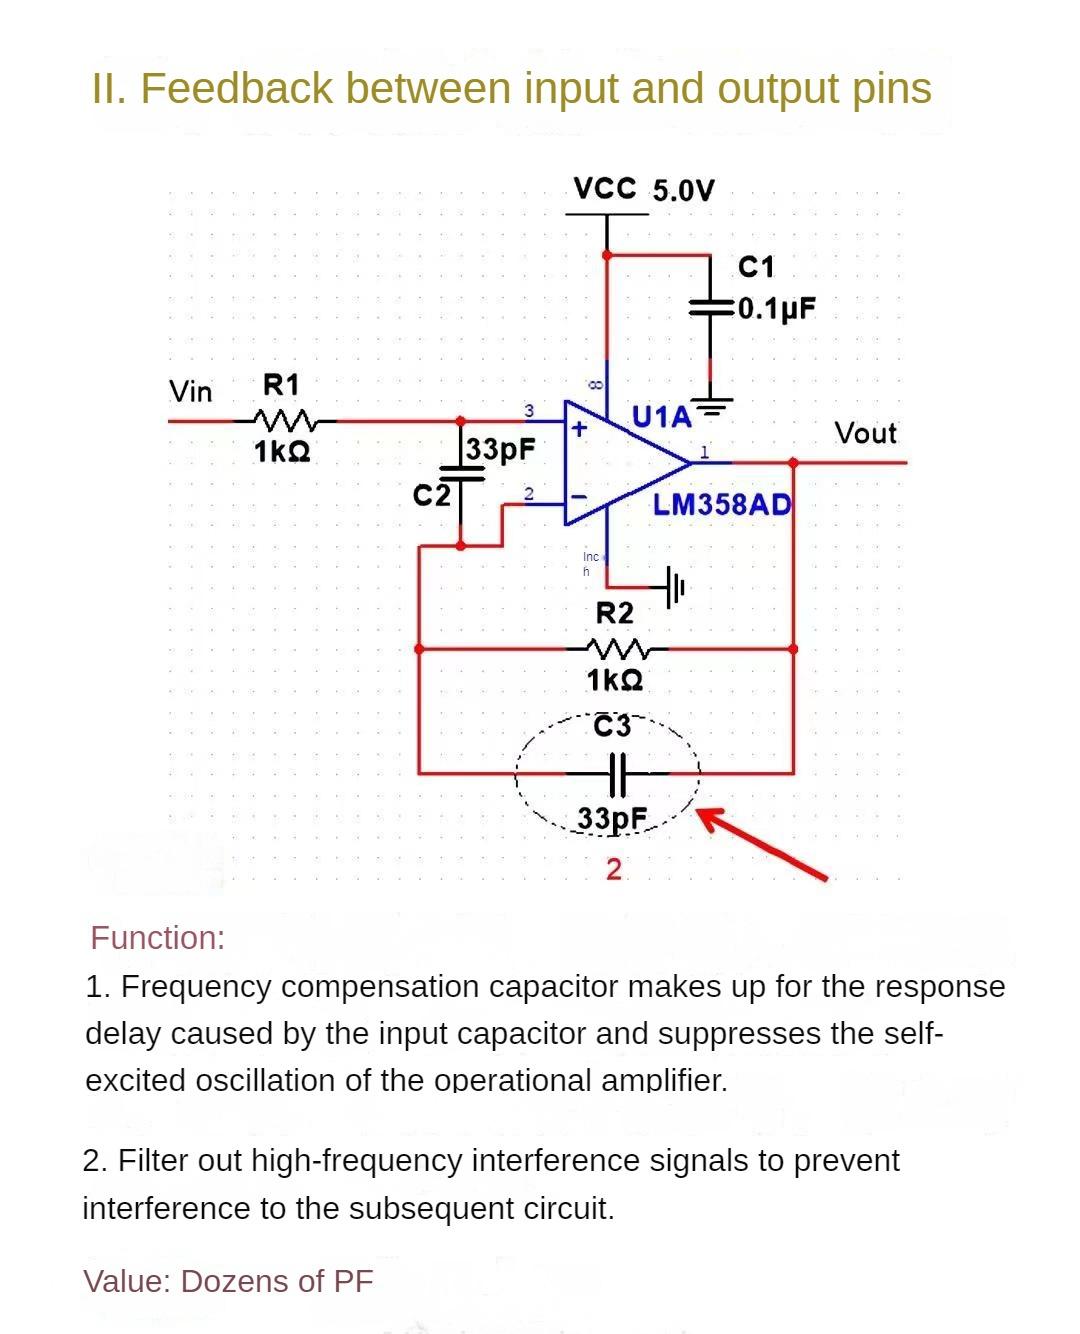 role of capacitor